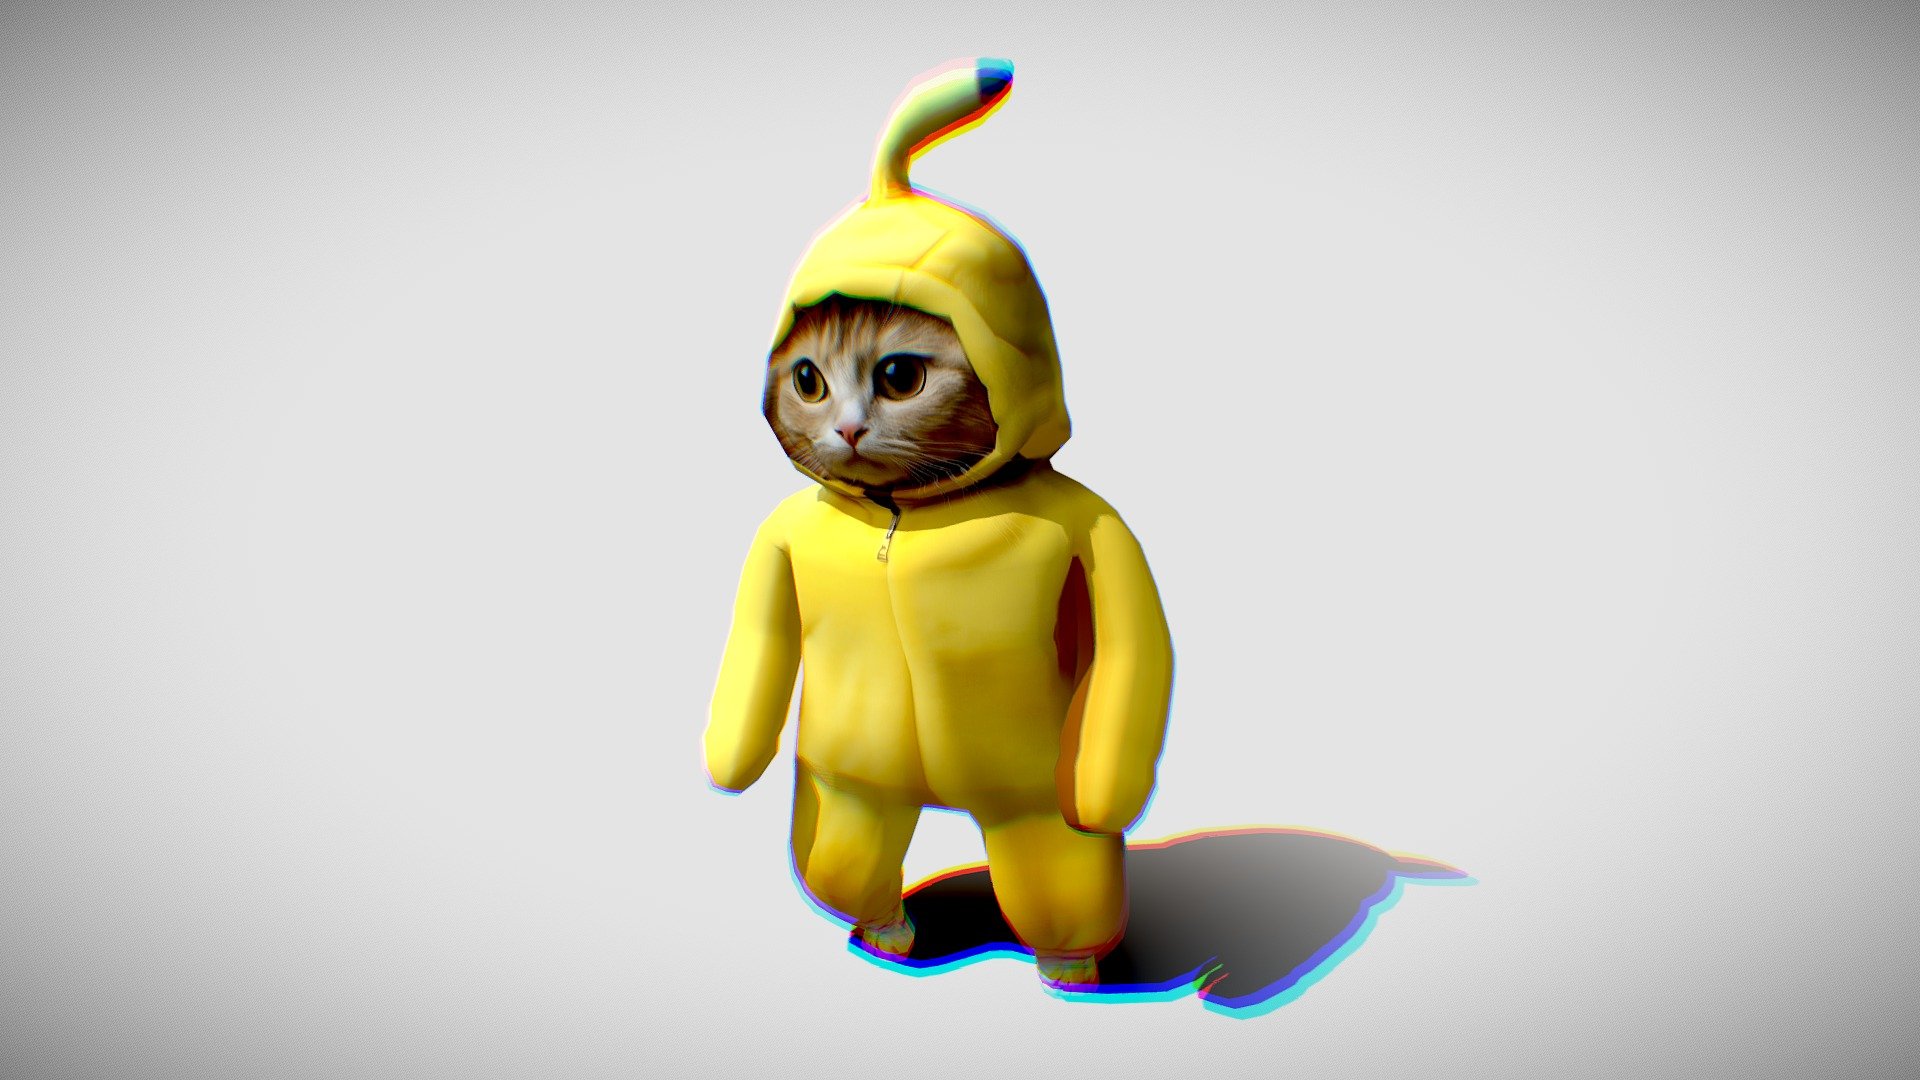 A new version of Happy Cat or Banana Cat animated with Mixamo and rendered with Blender 3D.
Happy Happy Happy! - Banana Cat - Happy Cat - FBX + Blender Model - Buy Royalty Free 3D model by William Santacruz (@williamsantacruz3d) 3d model